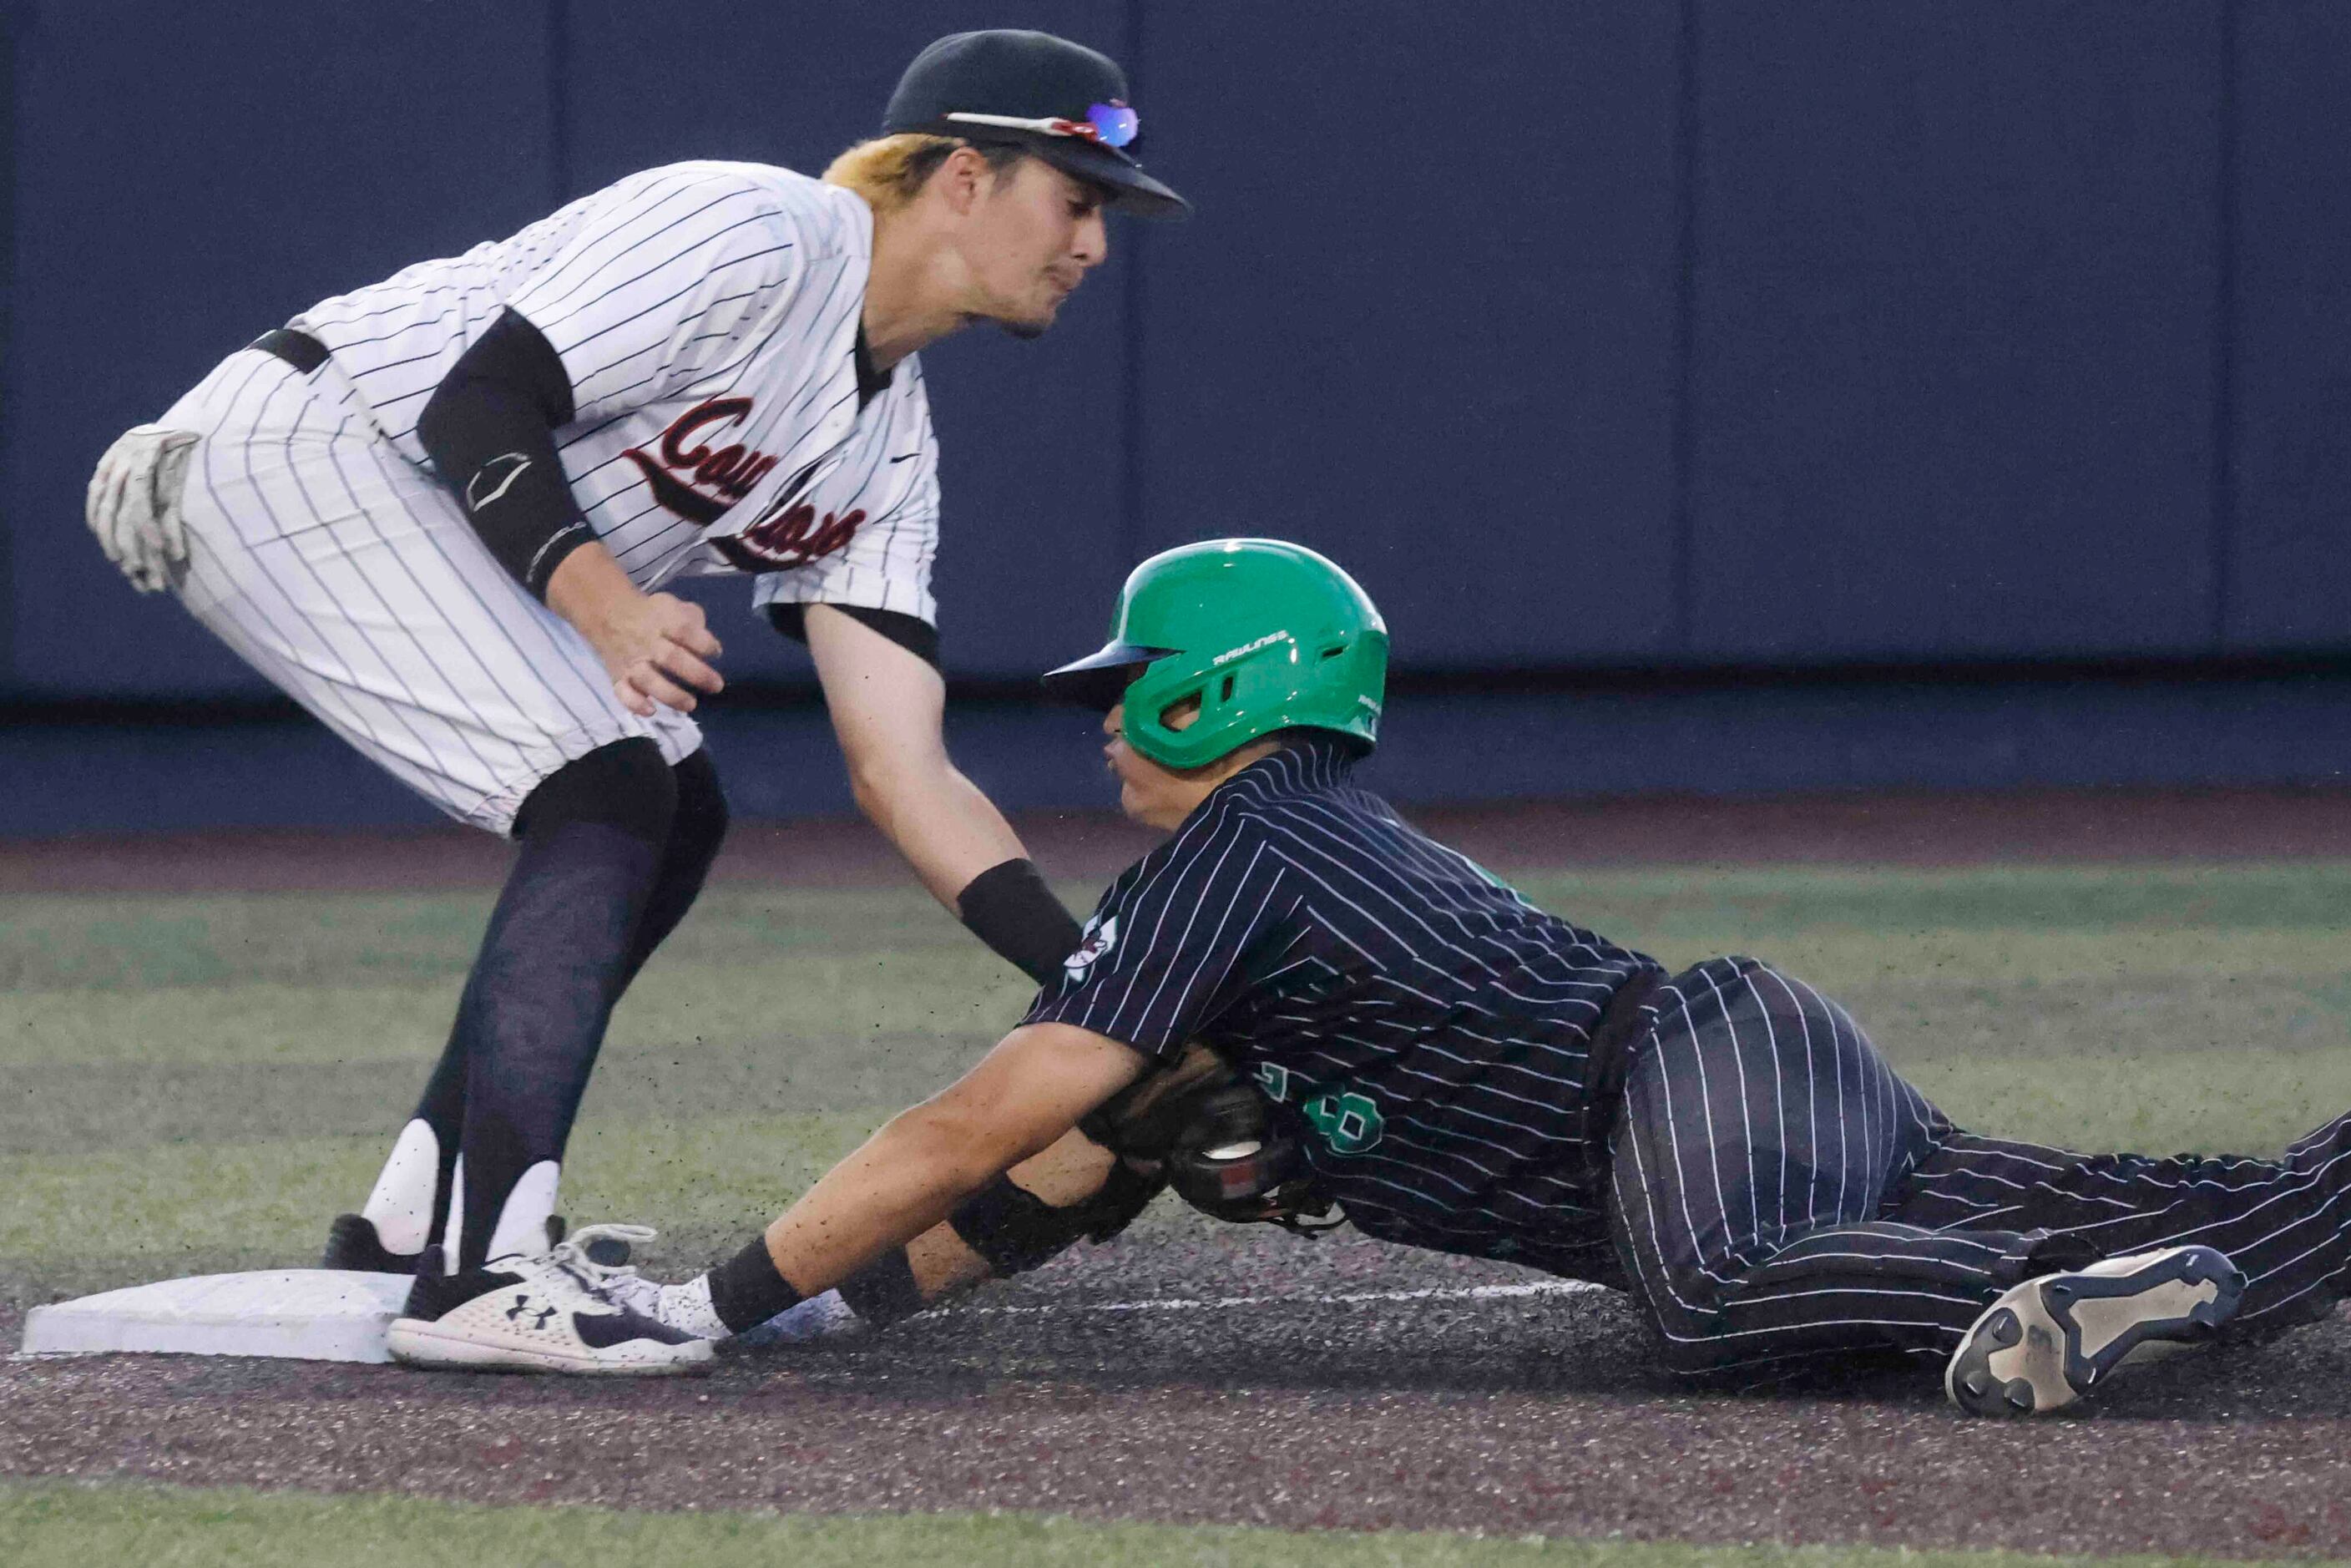 Southlake Carroll’s Ben Tryon, right, misses to touch the fourth base past Coppell’s Tanner...